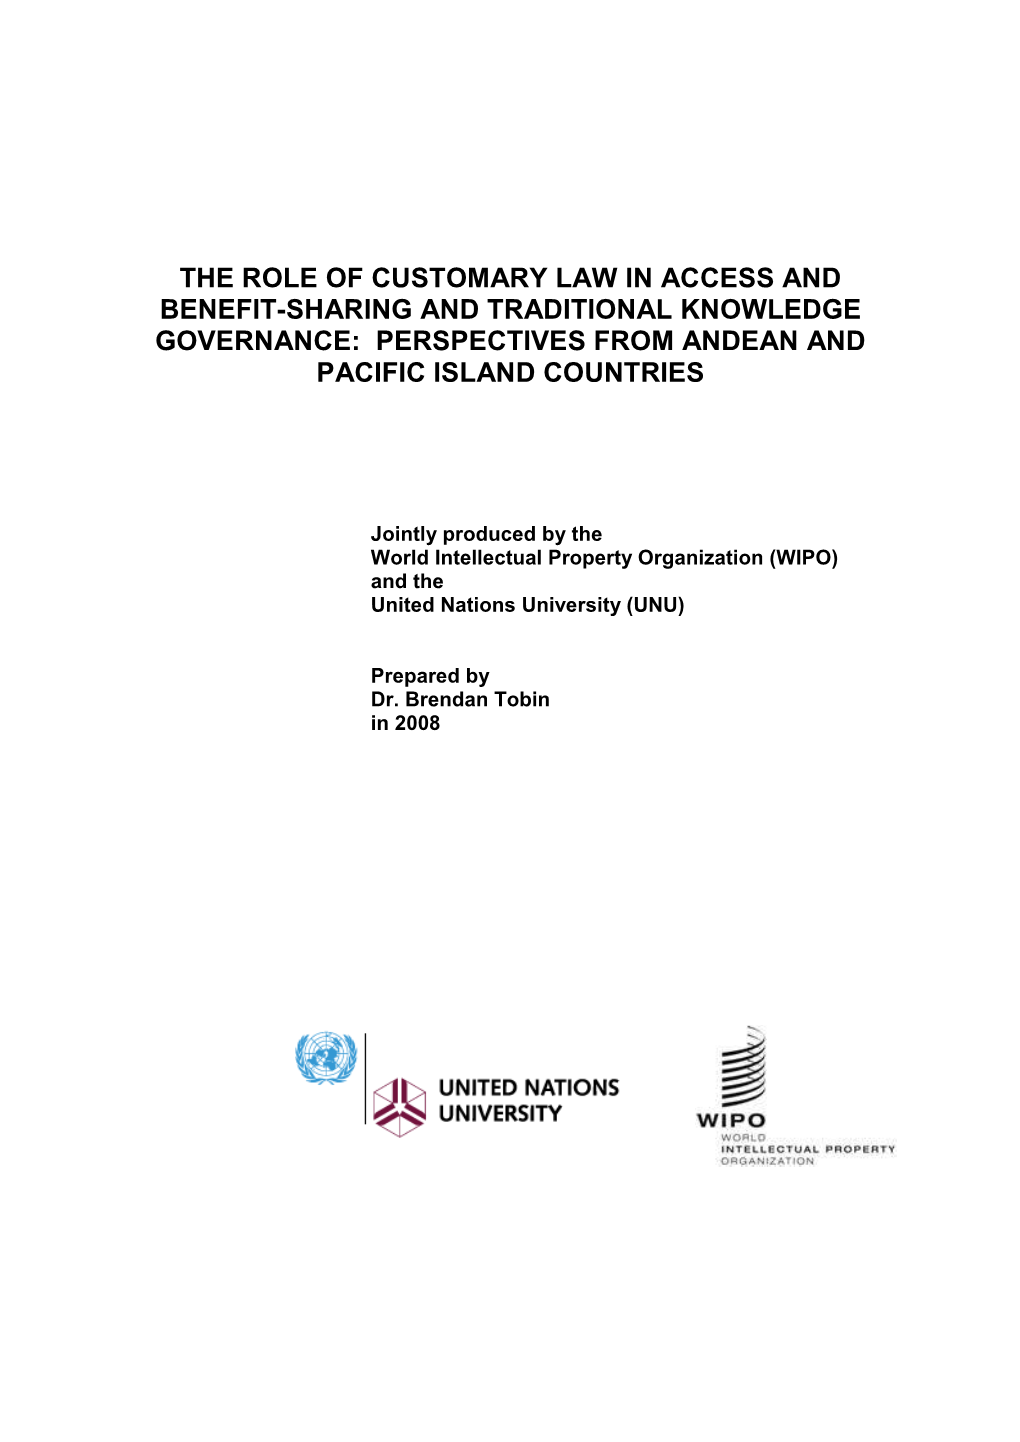 The Role of Customary Law in Access and Benefit-Sharing and Traditional Knowledge Governance: Perspectives from Andean and Pacific Island Countries